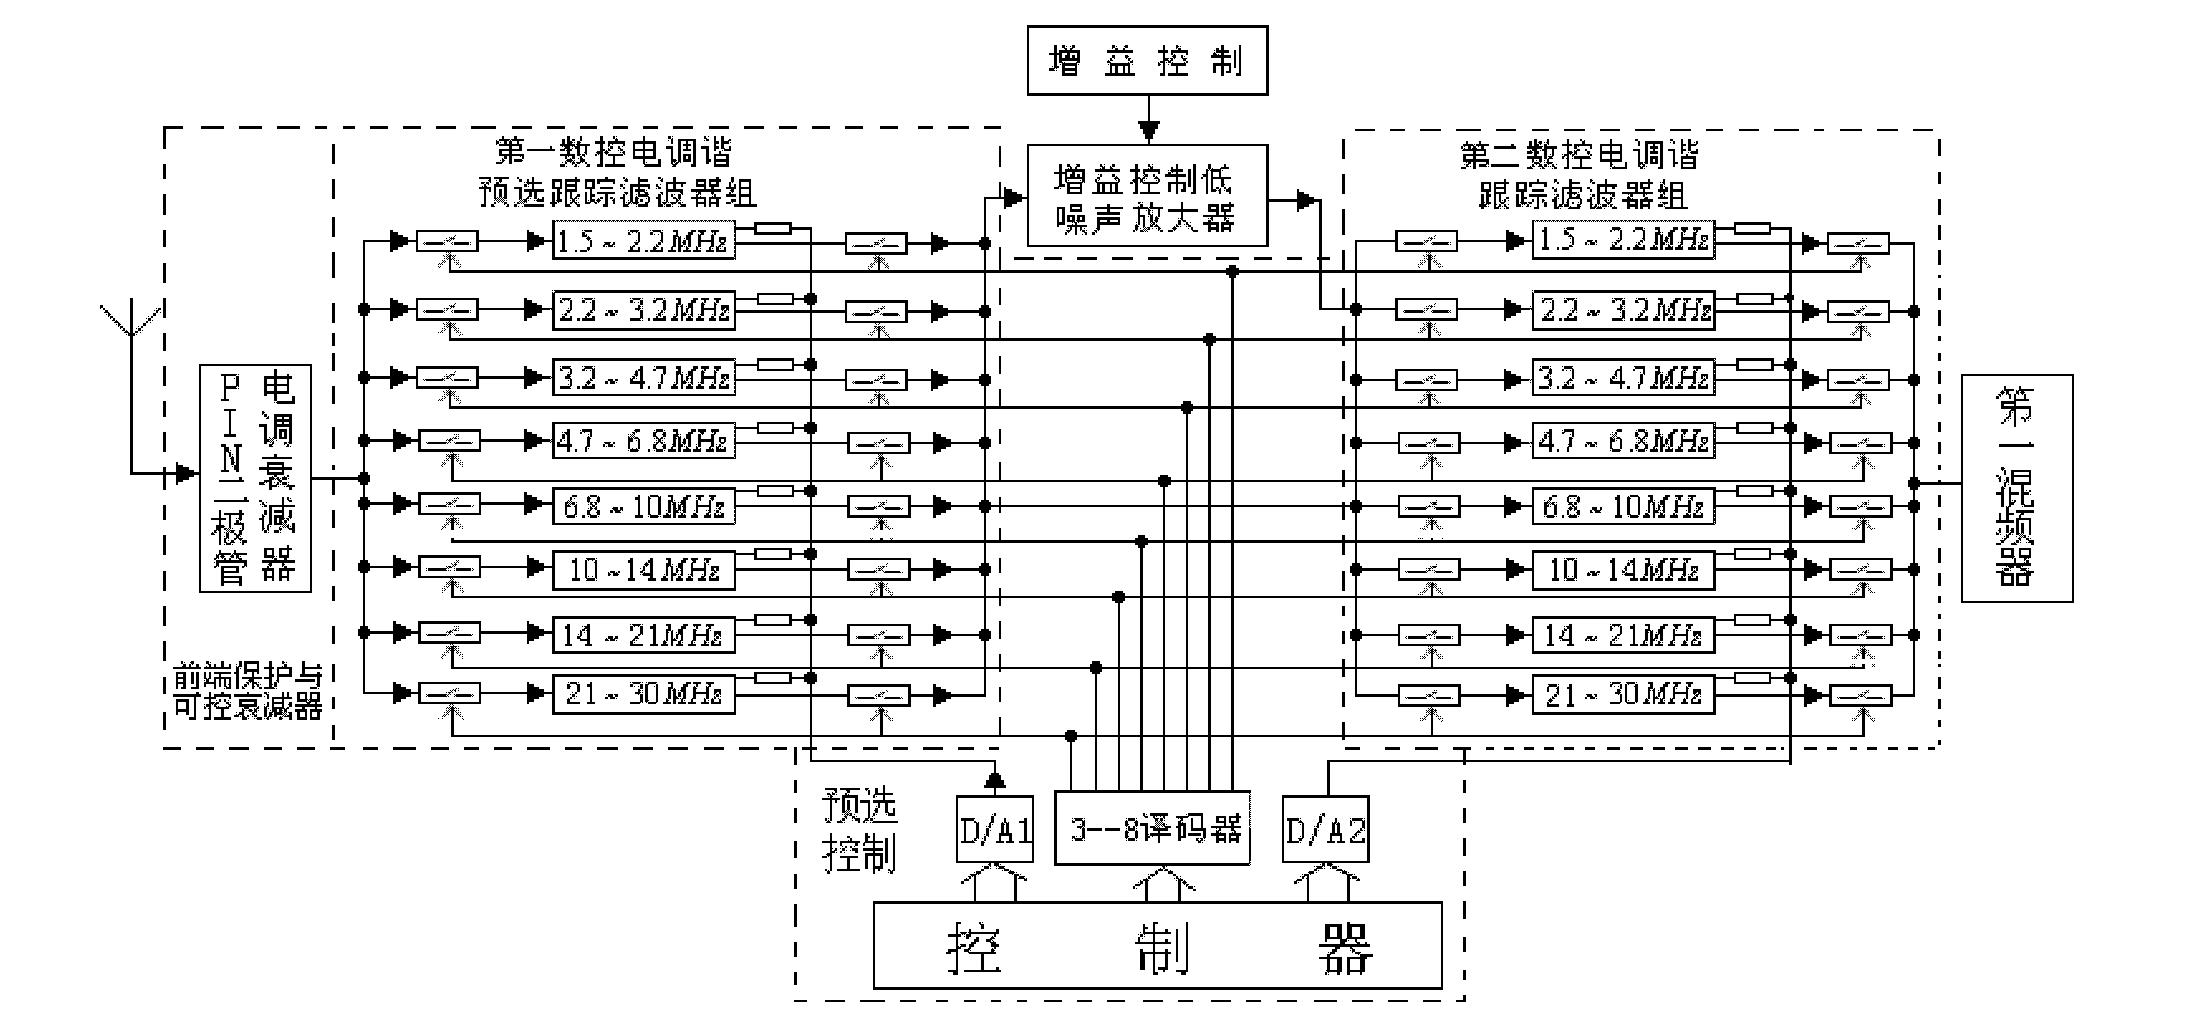 High/intermediate-frequency front-end circuit of digital short-wave receiver